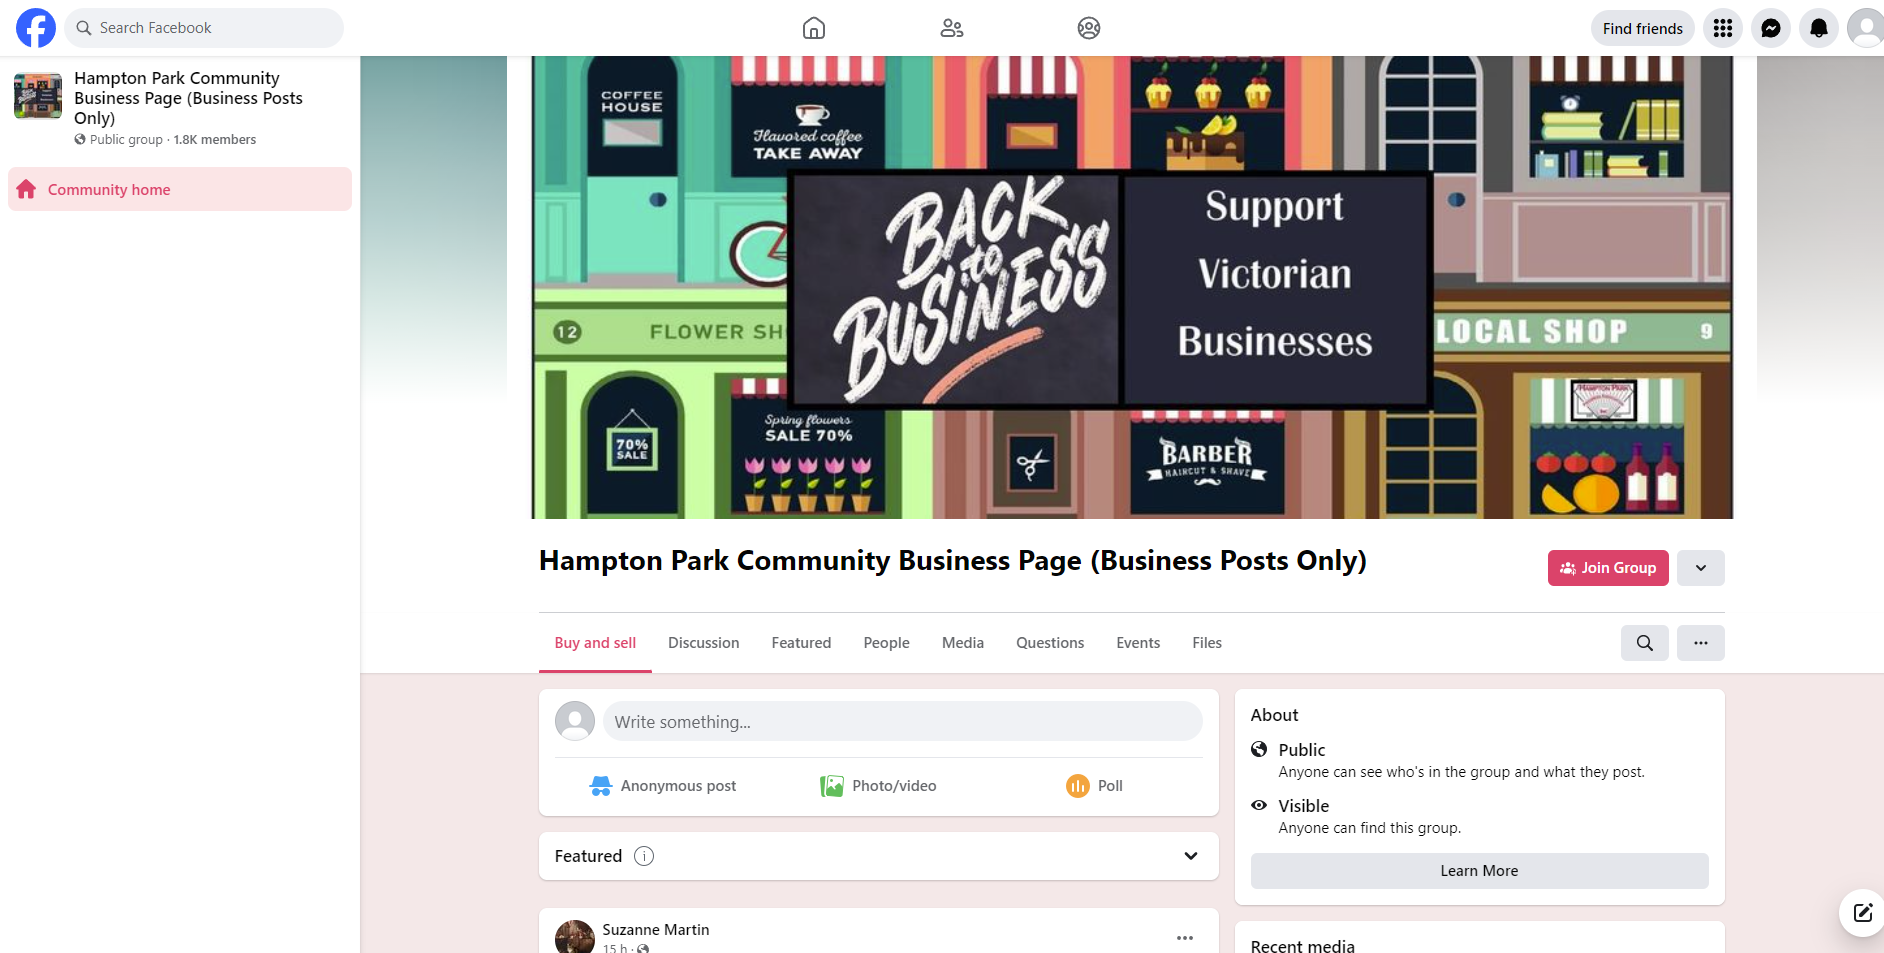 Hampton Park Community Business Page (Business Posts Only)